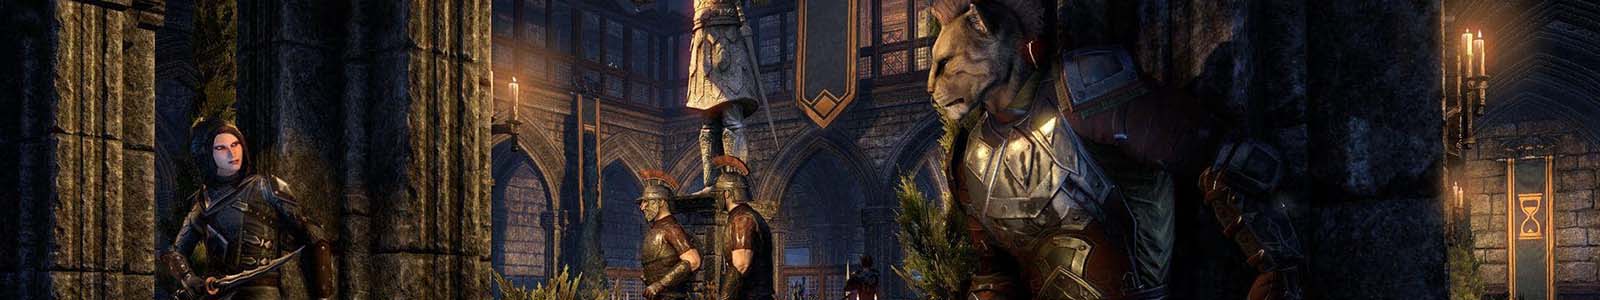 ESO Thieves Guild and Dark Brotherhood Celebration Event Guide header